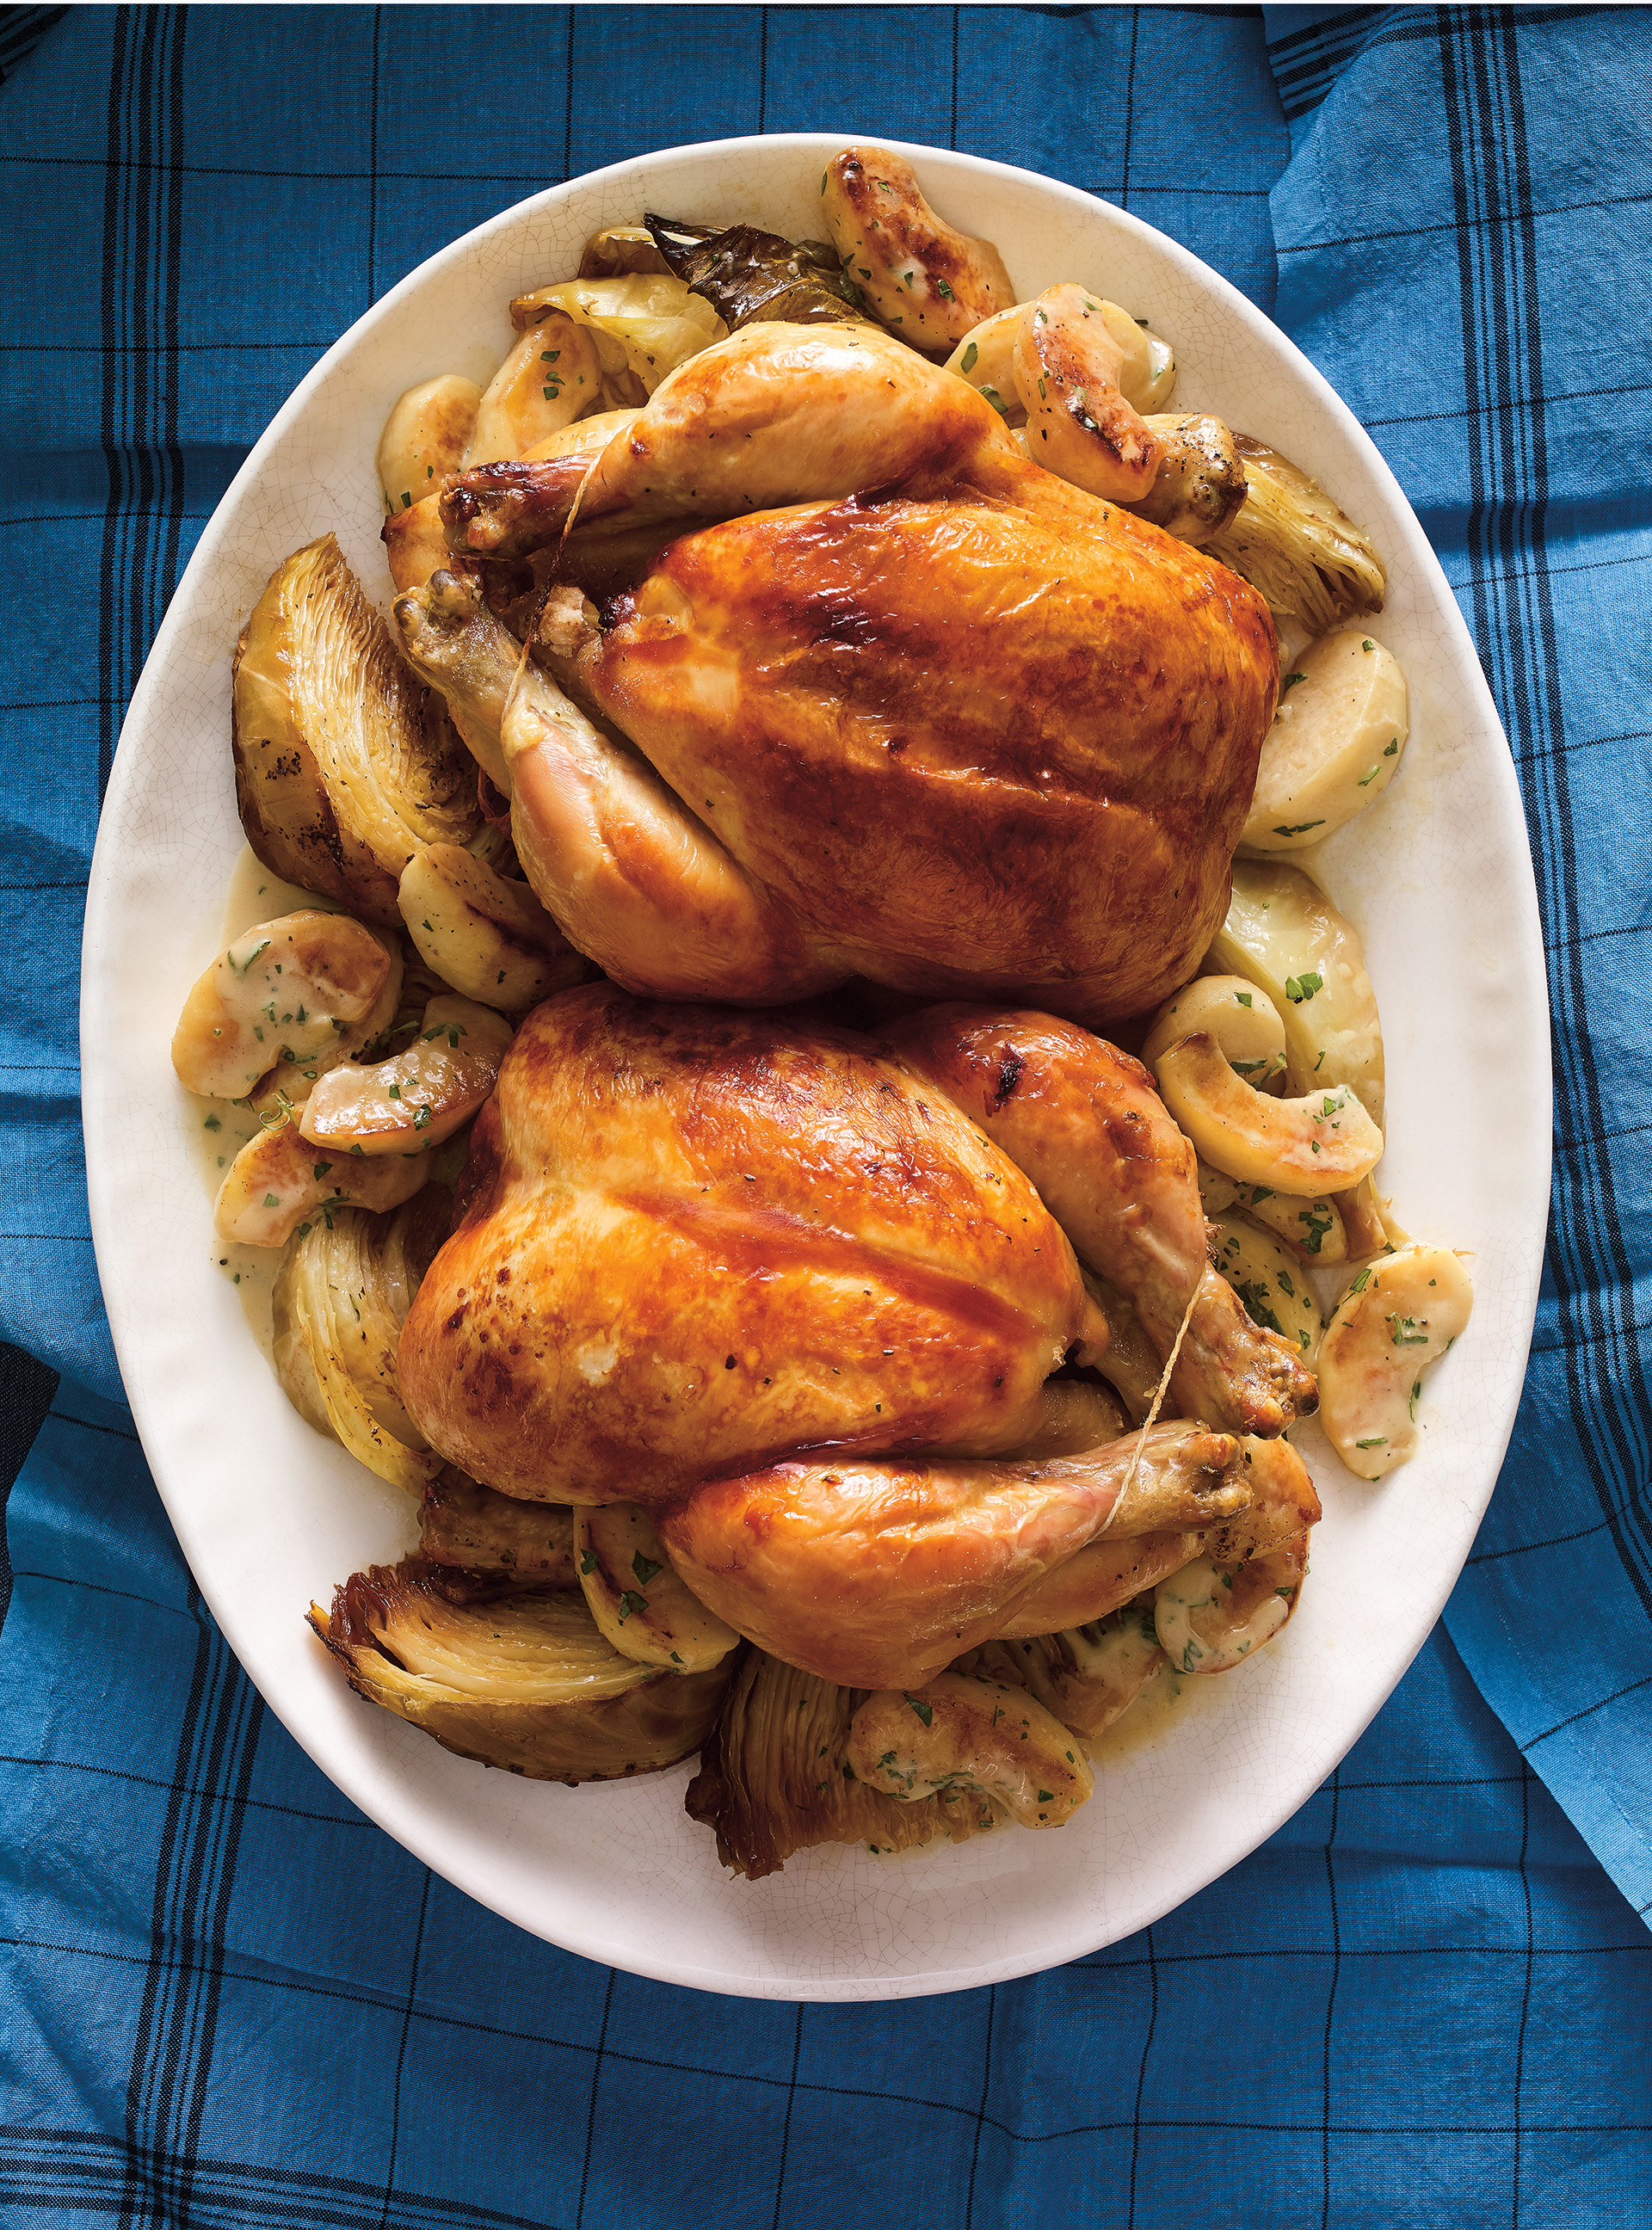 Roasted Chicken with Cabbage and Glazed Apples